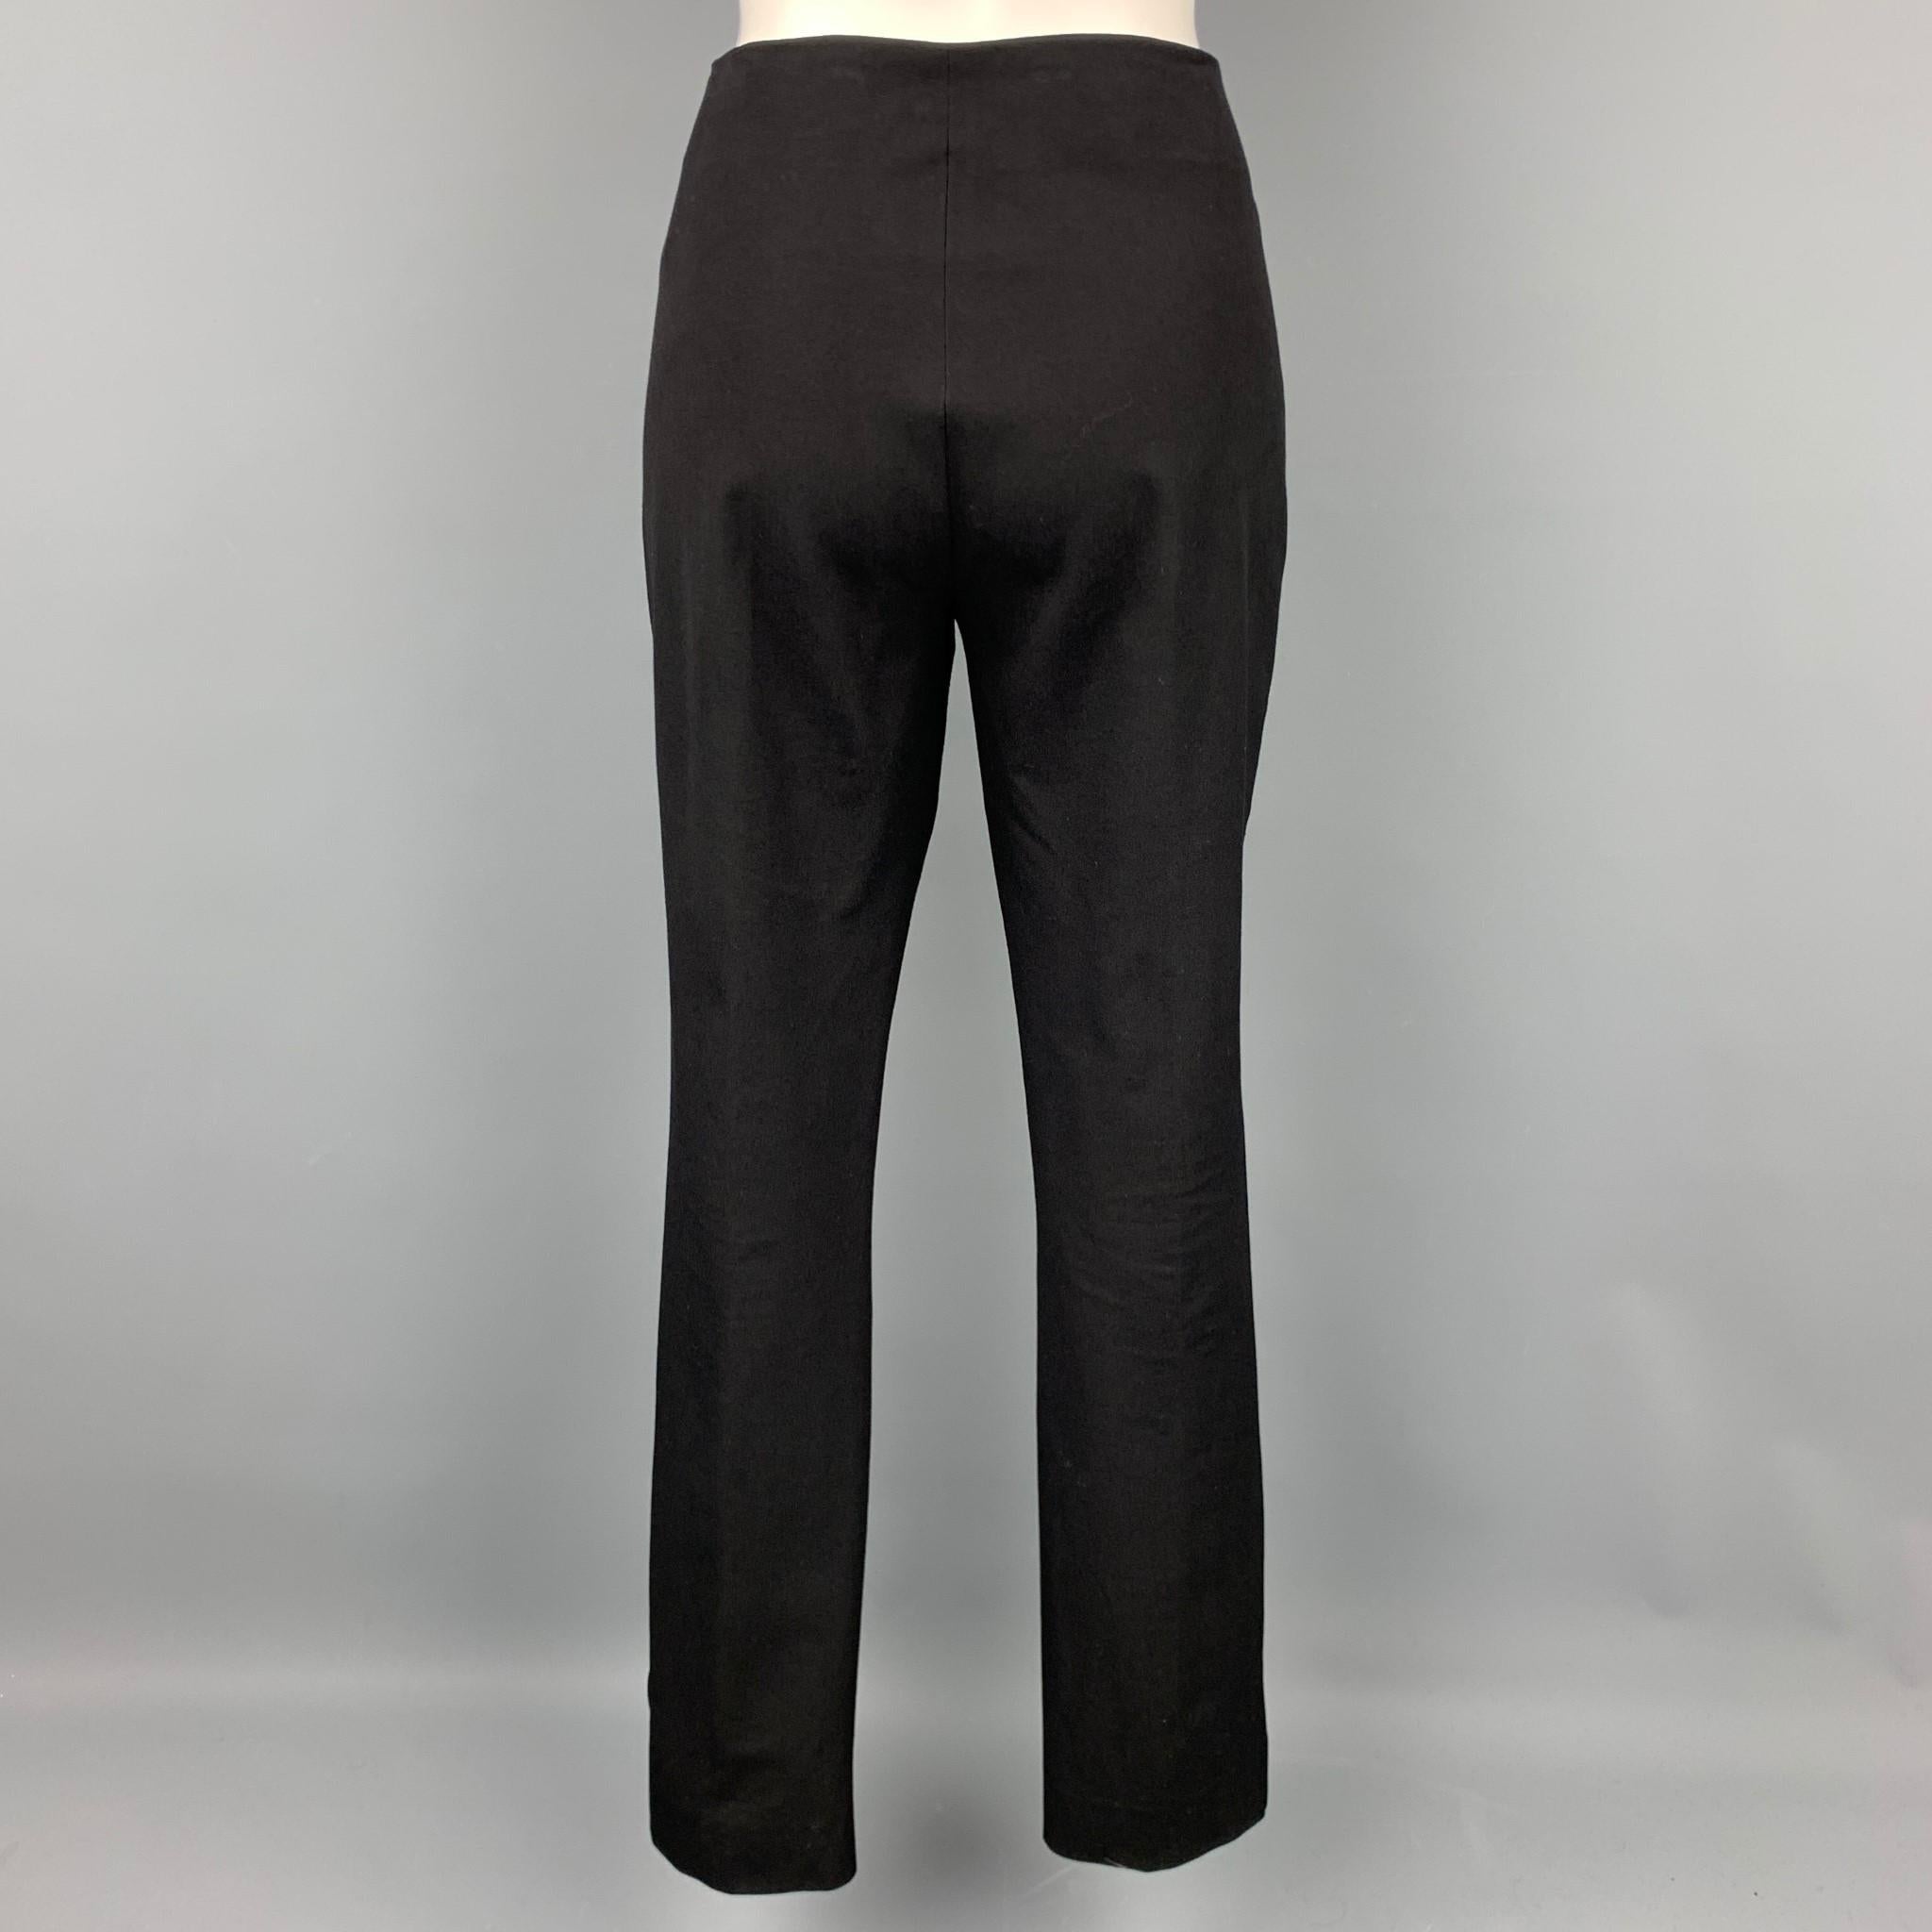 JOSEPH dress pants comes in a black viscose / cotton featuring a narrow leg and a side zip up closure. Made in France.

Very Good Pre-Owned Condition.
Marked: FR 44

Measurements:

Waist: 34 in.
Rise: 8.5 in.
Inseam: 30 in. 